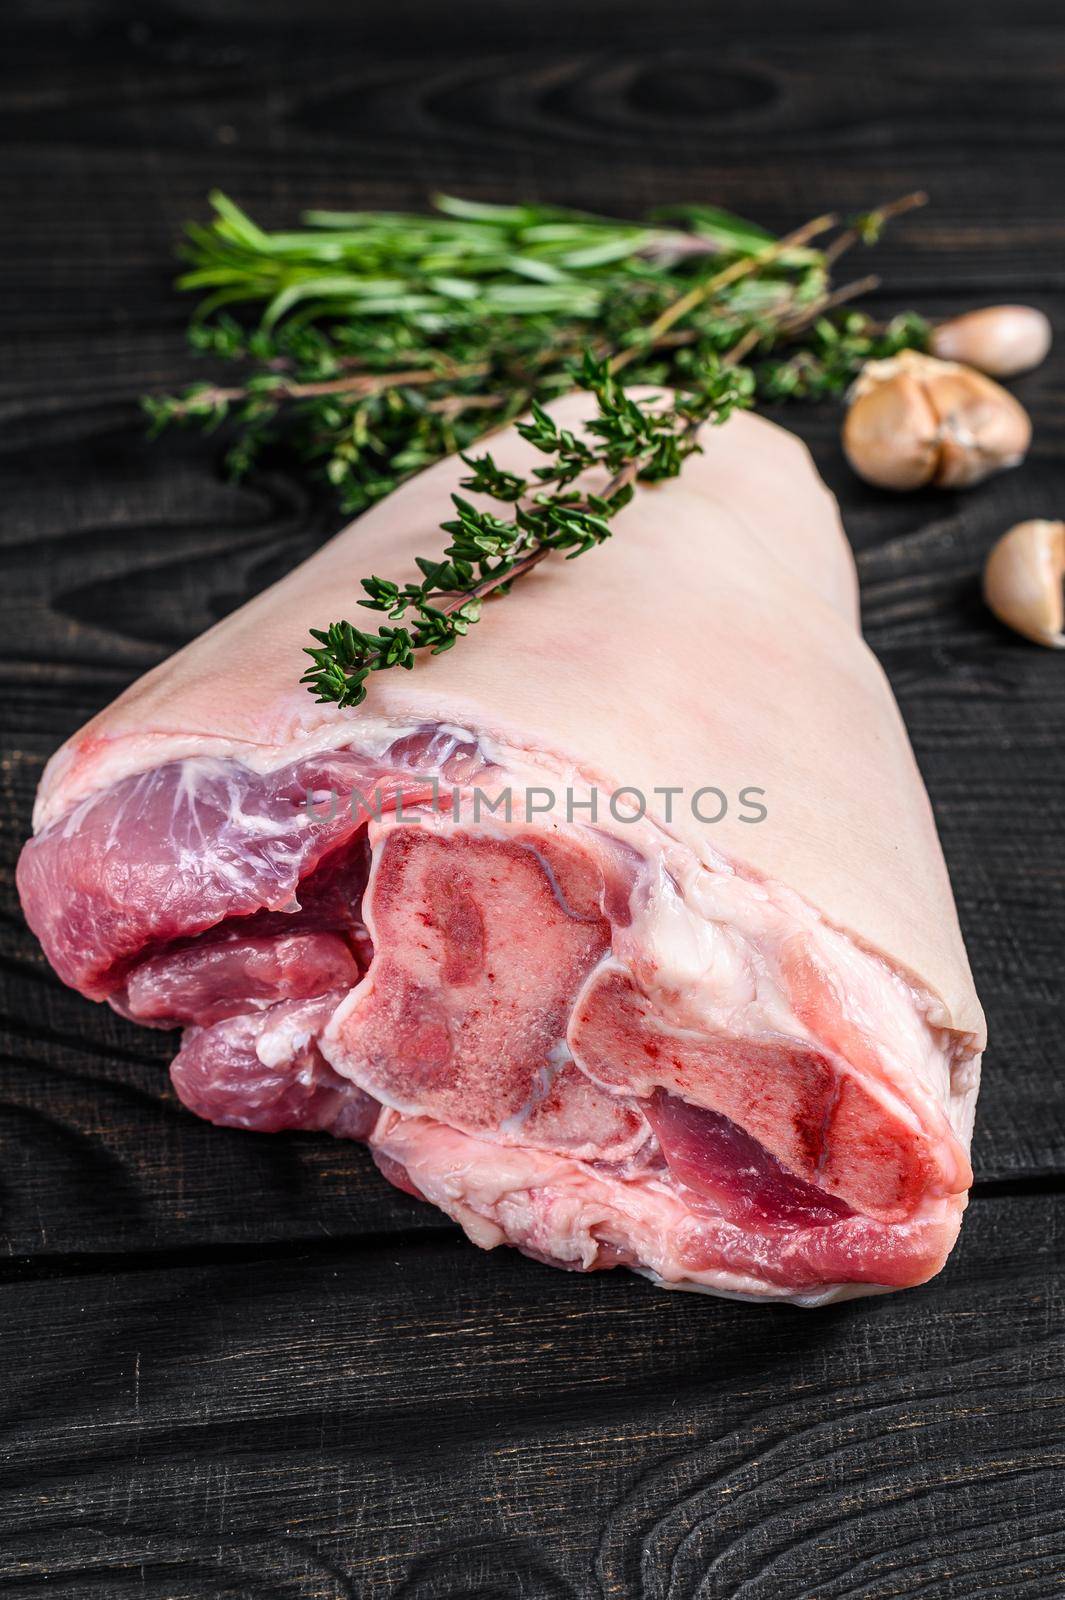 Raw Pork knuckle leg meat on kitchen table with herbs. Black wooden background. Top view.